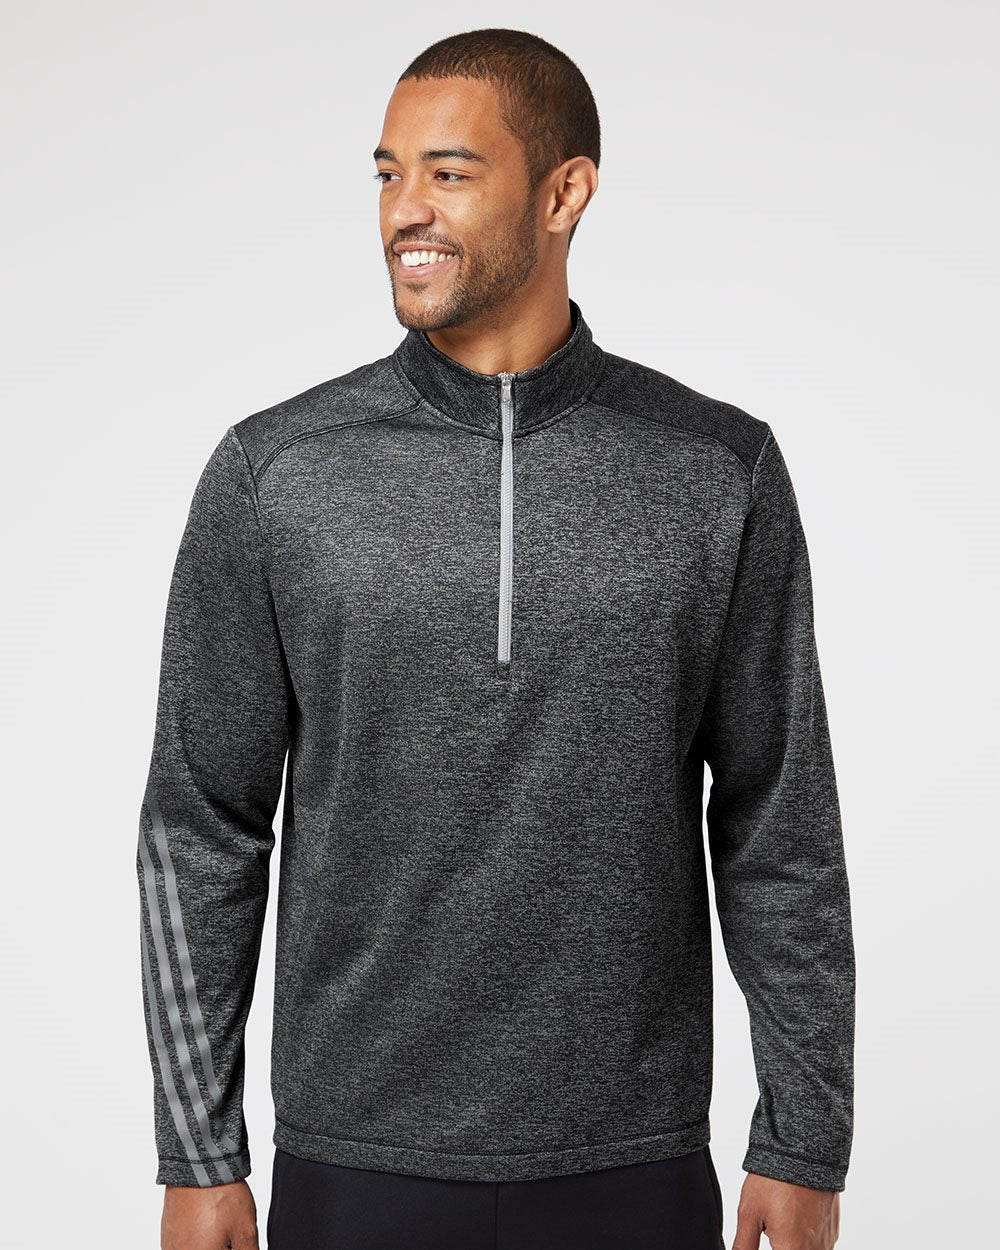 Adidas A284 Brushed Terry Heathered Quarter-Zip Pullover Adidas A284 Brushed Terry Heathered Quarter-Zip Pullover